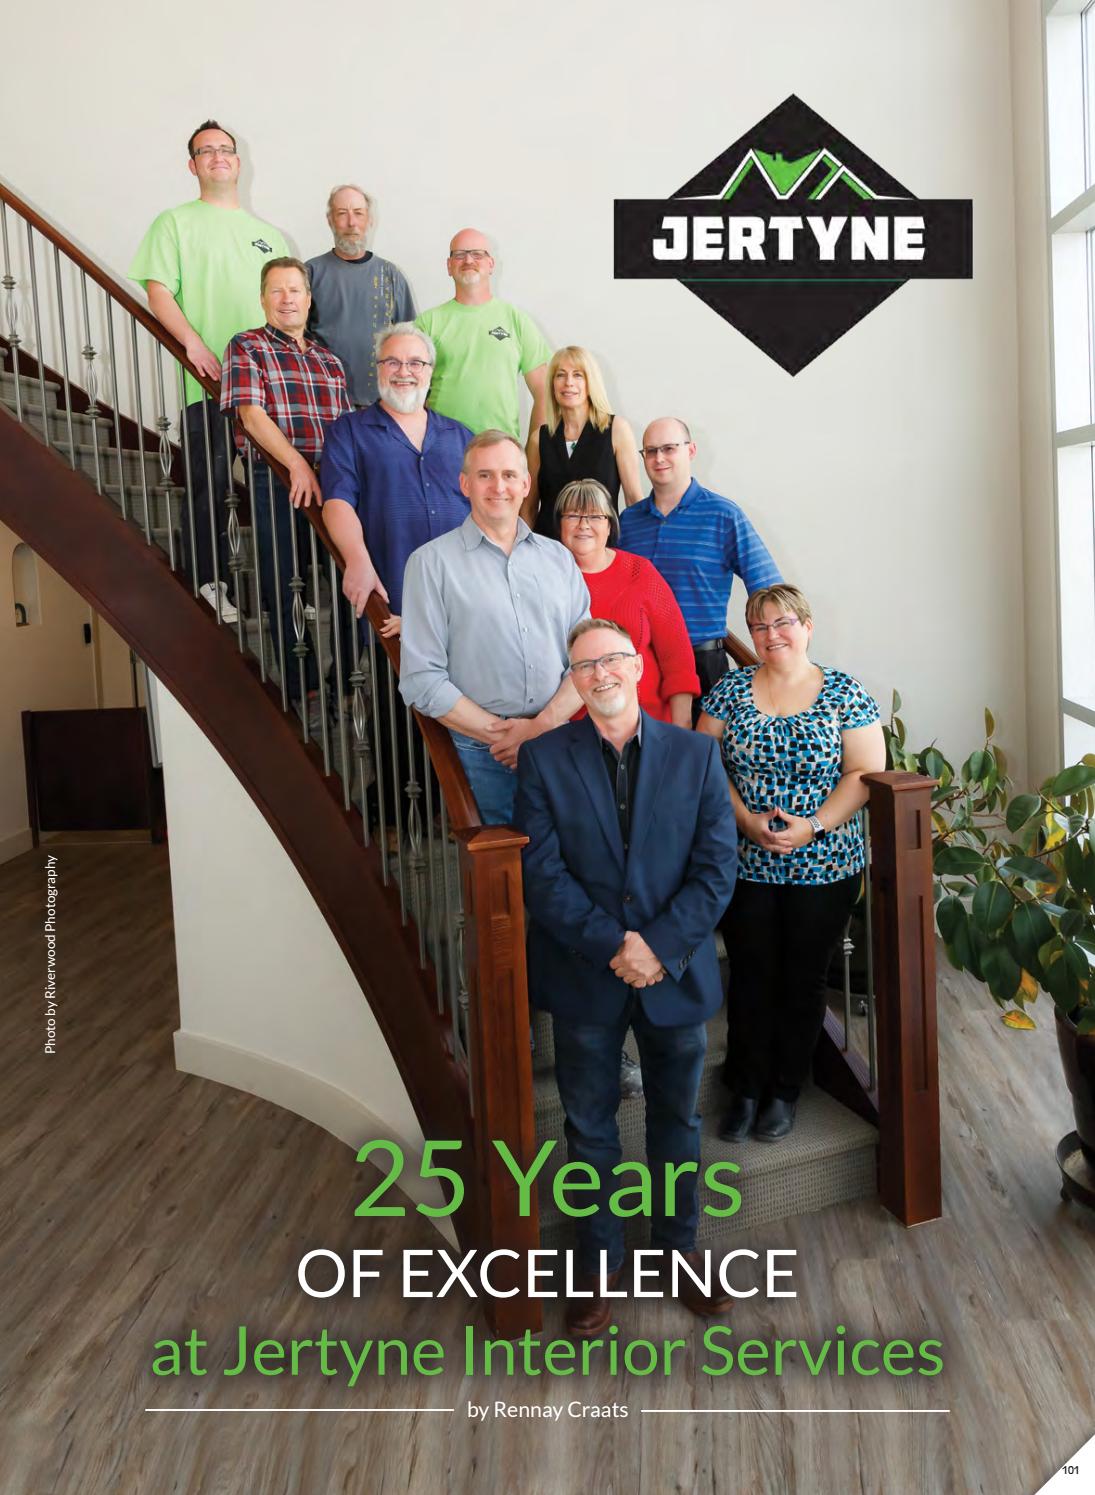 Business in Calgary Magazine - Business Profile for Jertyne Interior Services